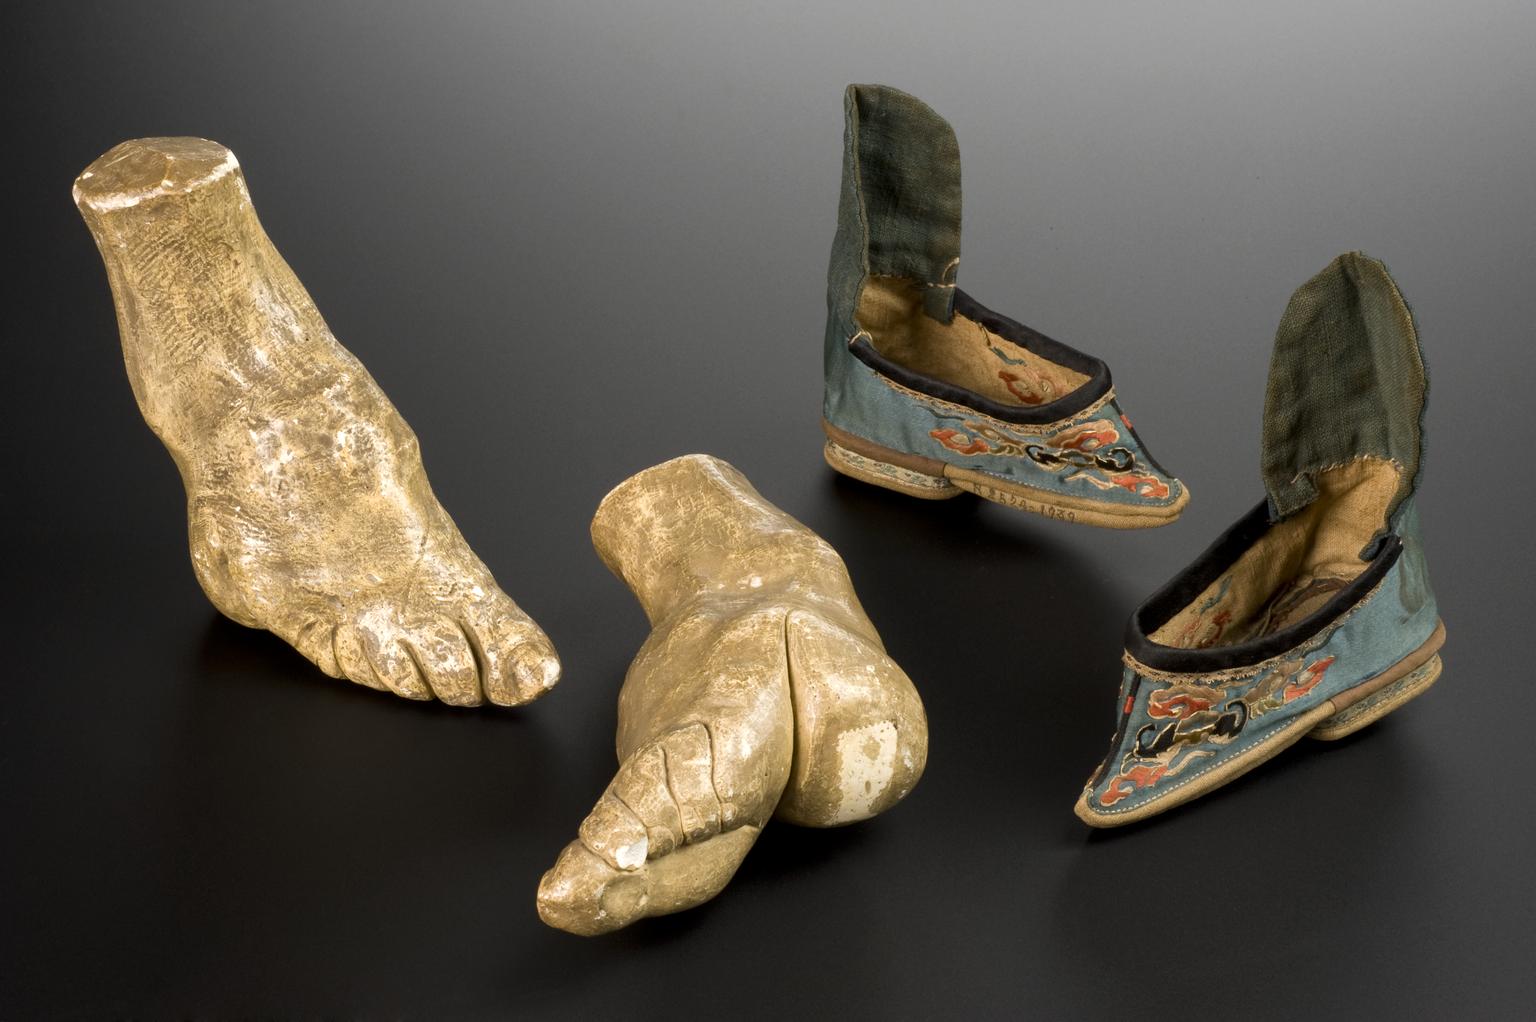 A photograph featuring plaster models of feet deformed by Chinese practice of foot-binding and a pair of shoes with low heel and pointed toe, silk uppers, embroidered in silk thread over paper, worn by Chinese women in the 19th century.